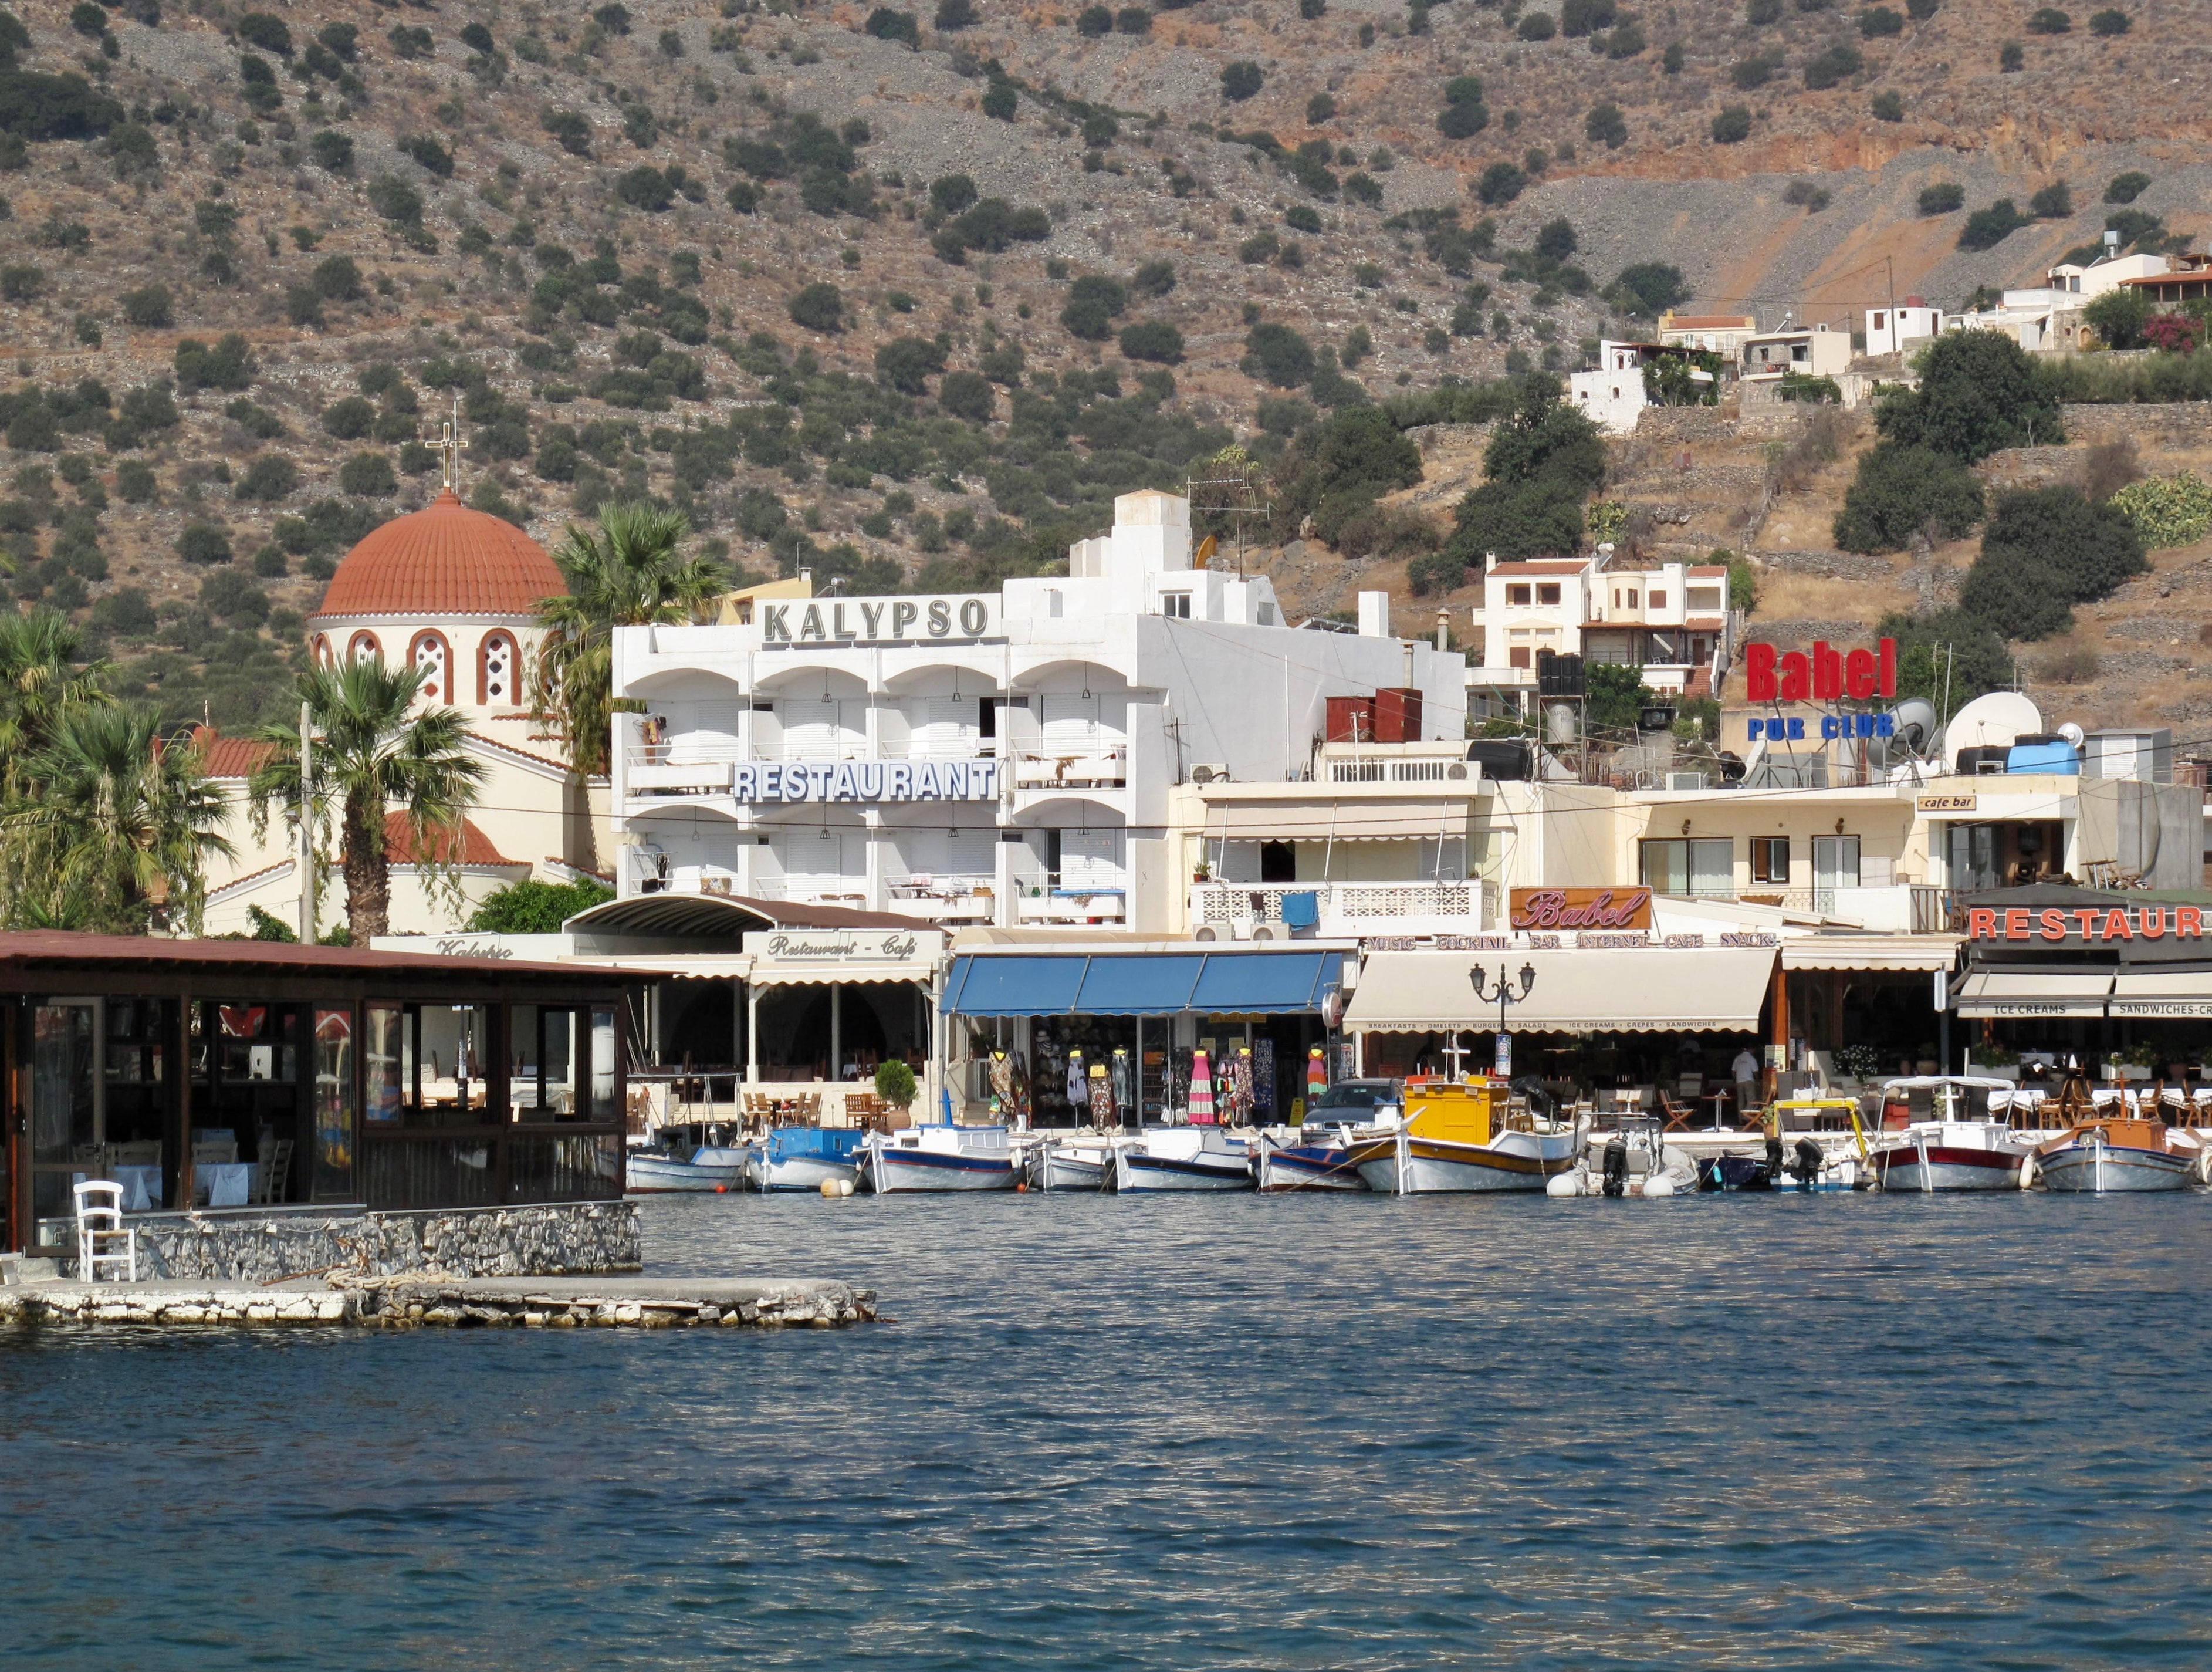 Elounda is one of many alluring destinations on the east coast of Crete